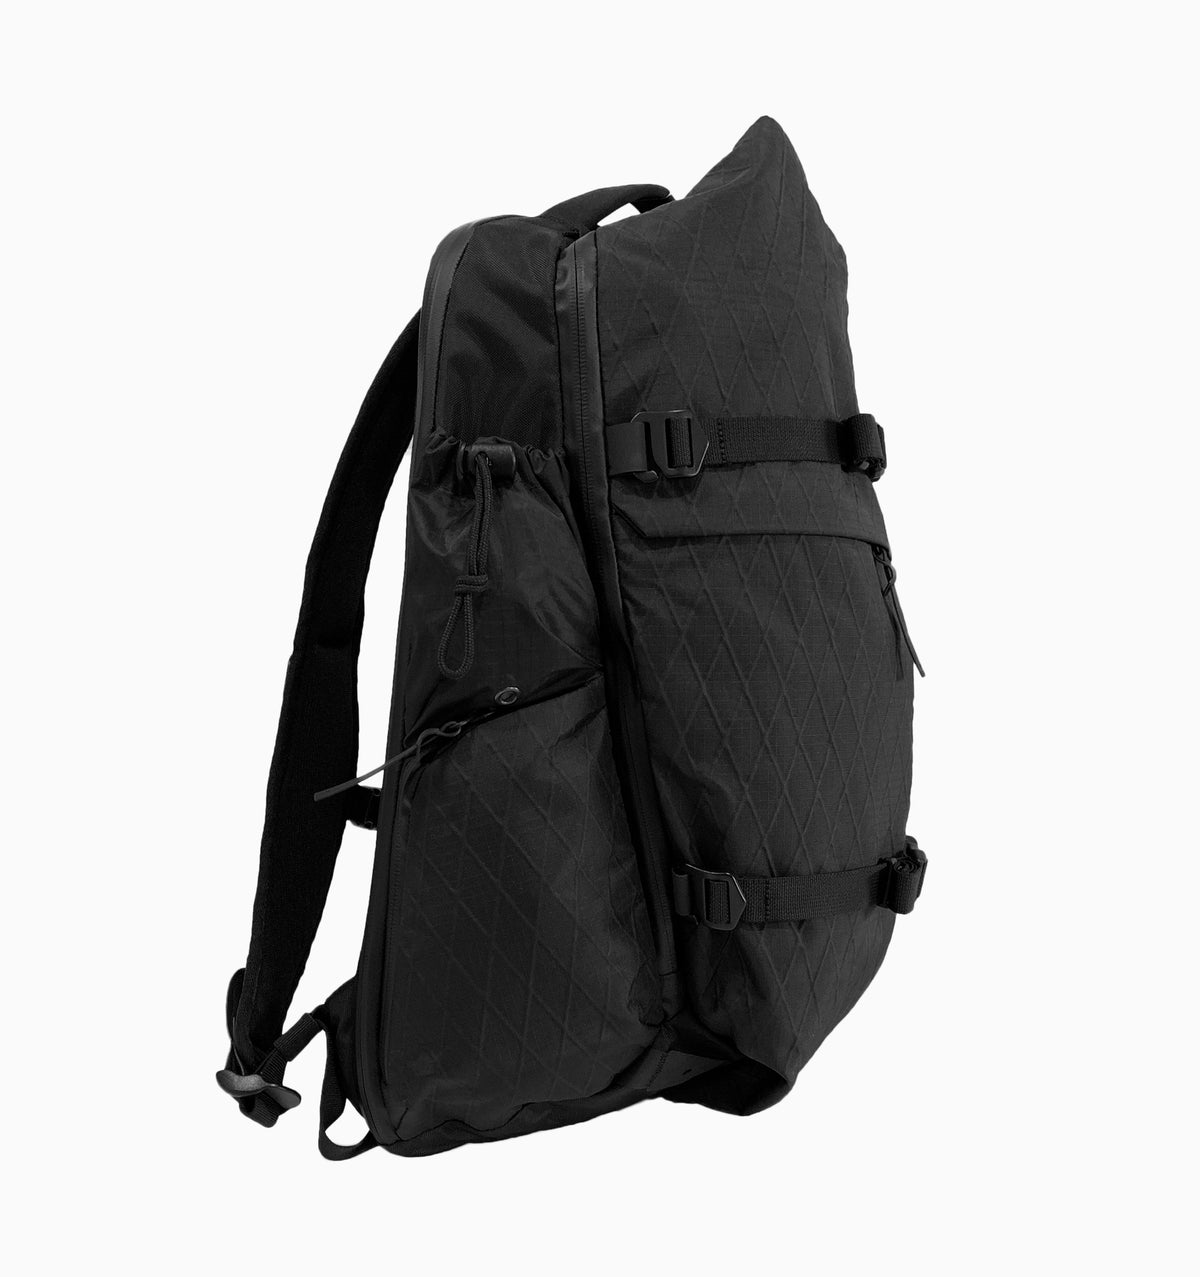 Code of Bell 16" X-TYPE Backpack 20L